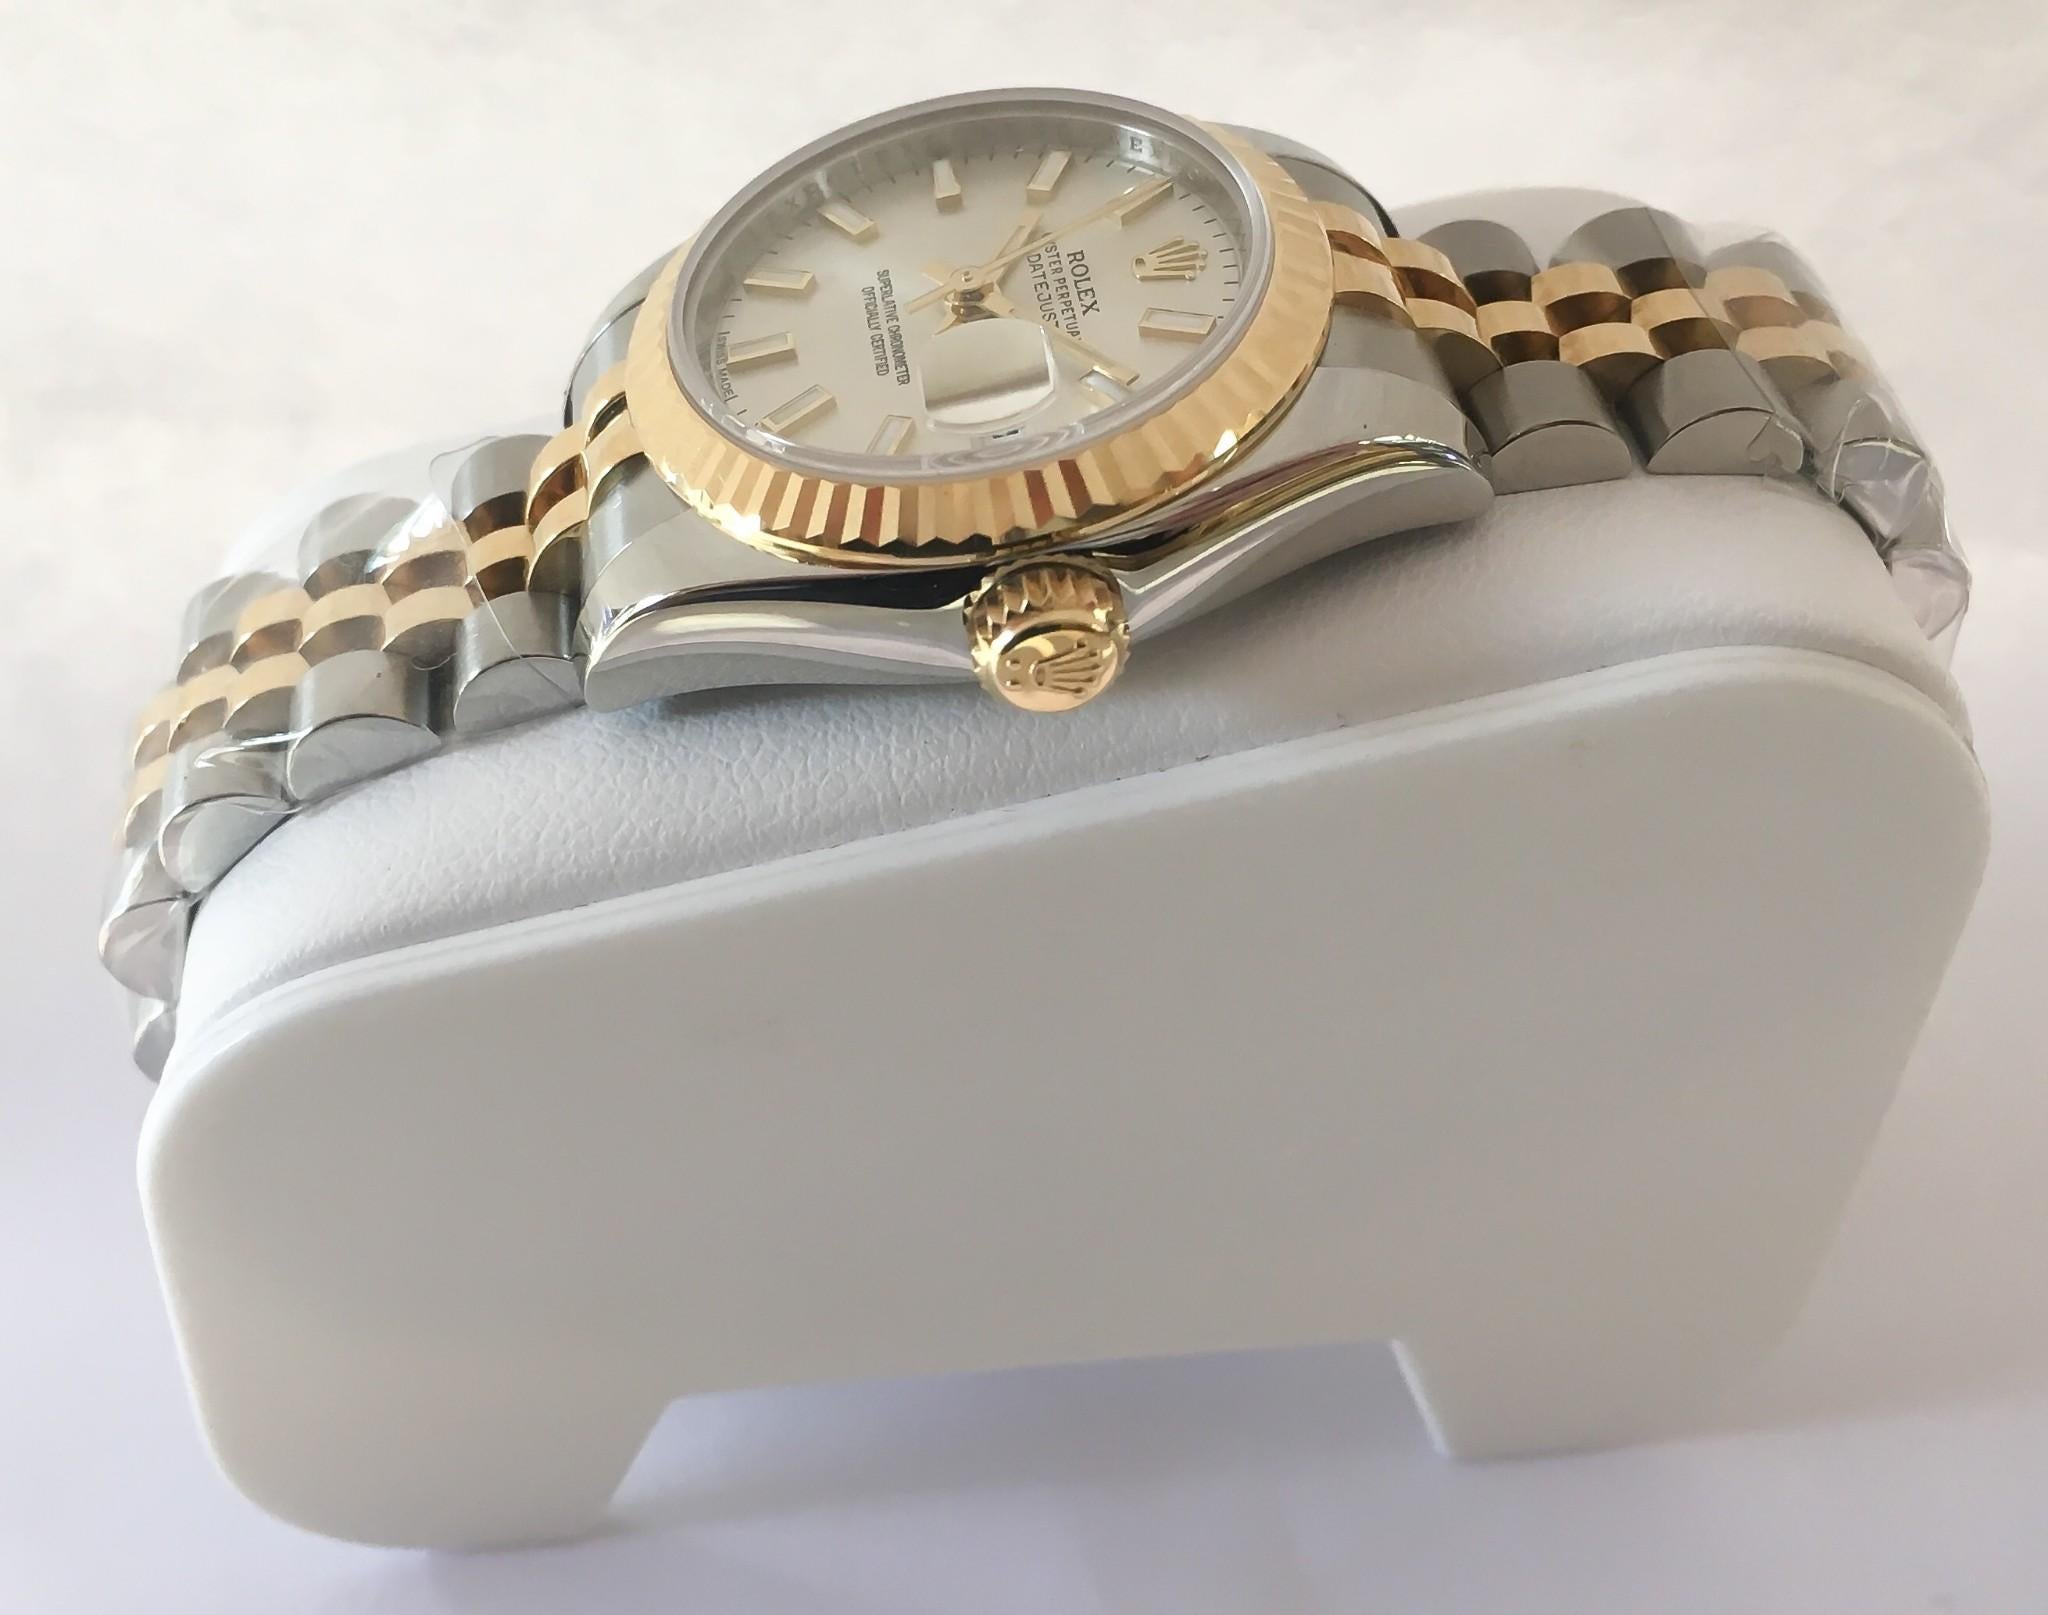 Beautiful new, unworn, 2013 women's Rolex Datejust designed in stainless steel & 18K yellow gold on a jubilee bracelet. Comes with all original box, papers, booklet.

•MODEL NO: 179173
•MOVEMENT: AUTOMATIC SELF WINDING 
•CASE MATERIAL: STAINLESS